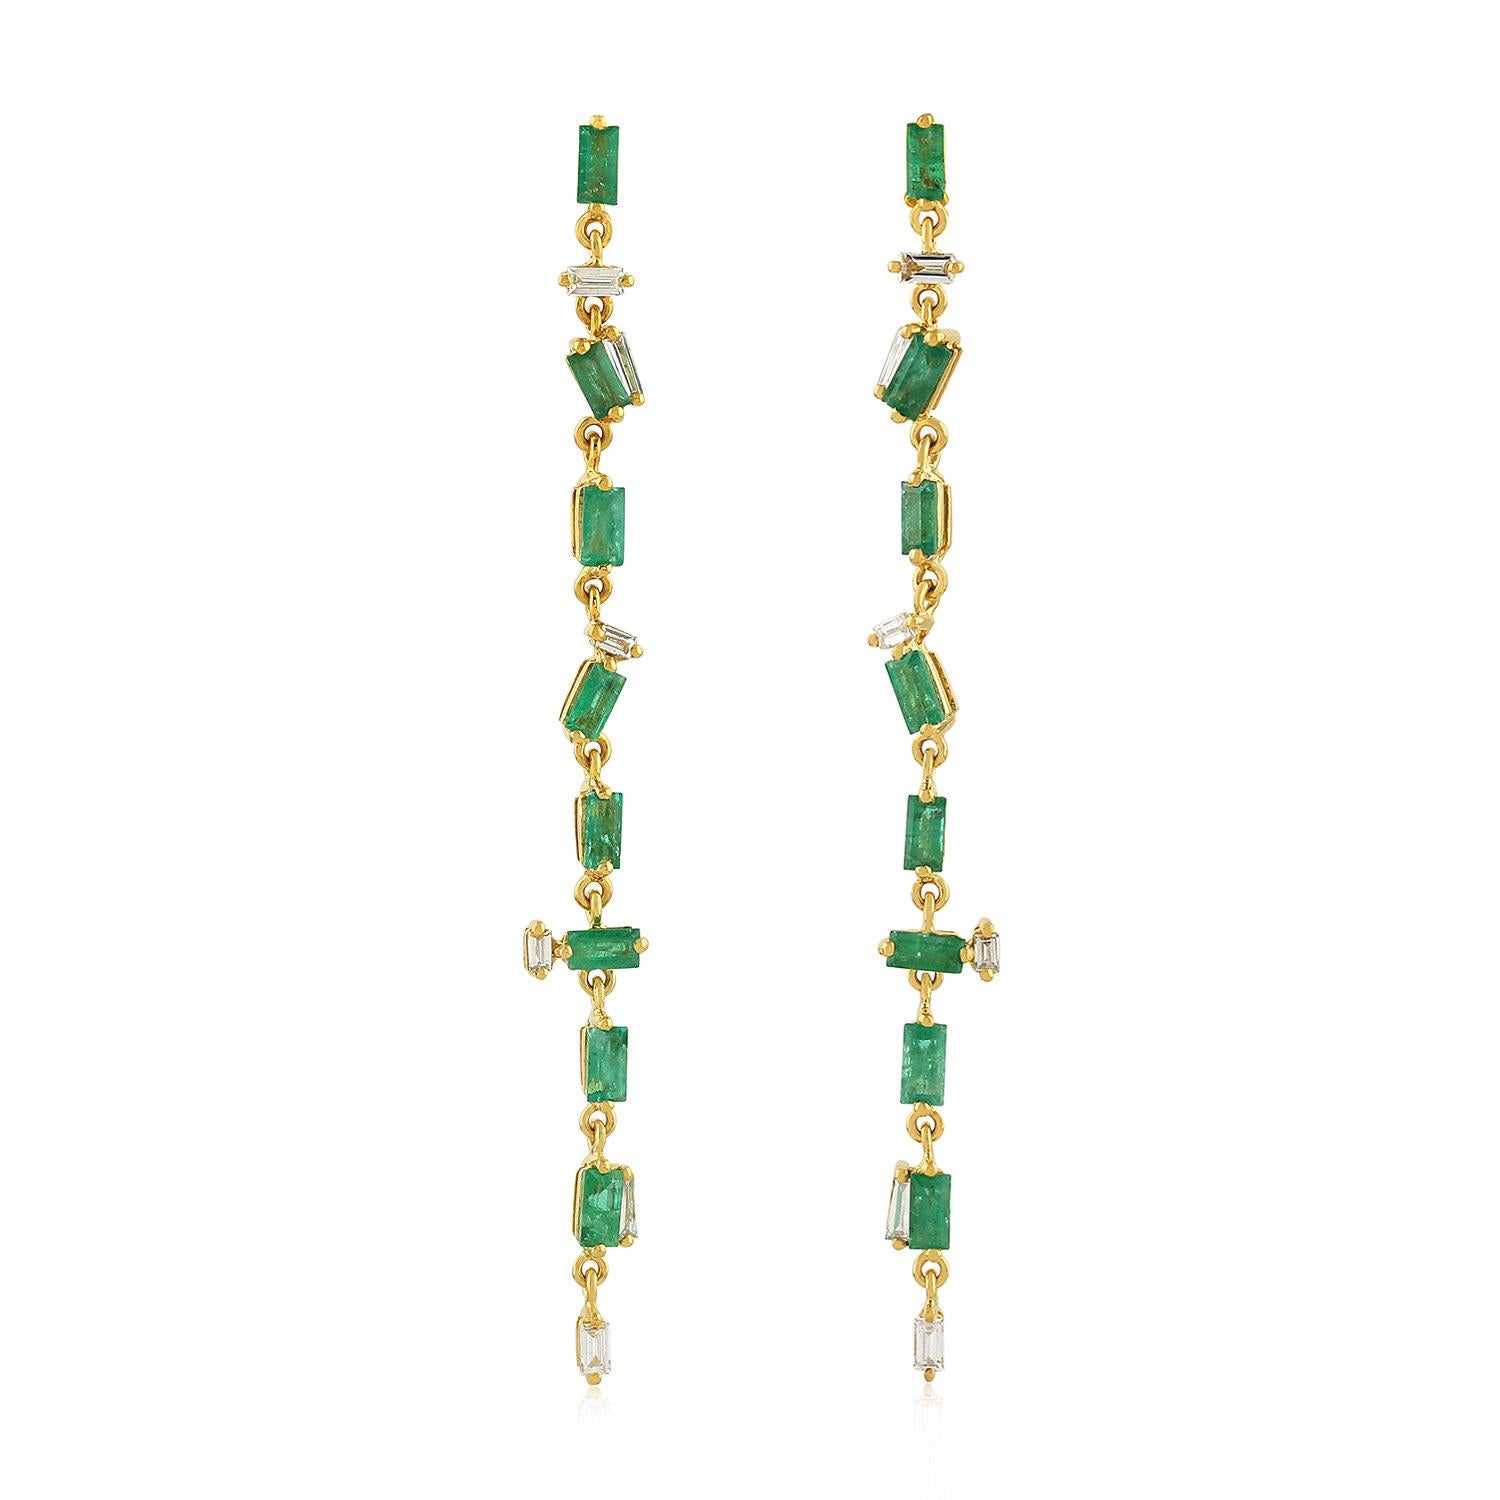 These beautiful earrings are handcrafted in 18K gold.  It is set in 2.31 carats emerald and .32 carats of sparkling diamonds.

FOLLOW  MEGHNA JEWELS storefront to view the latest collection & exclusive pieces.  Meghna Jewels is proudly rated as a